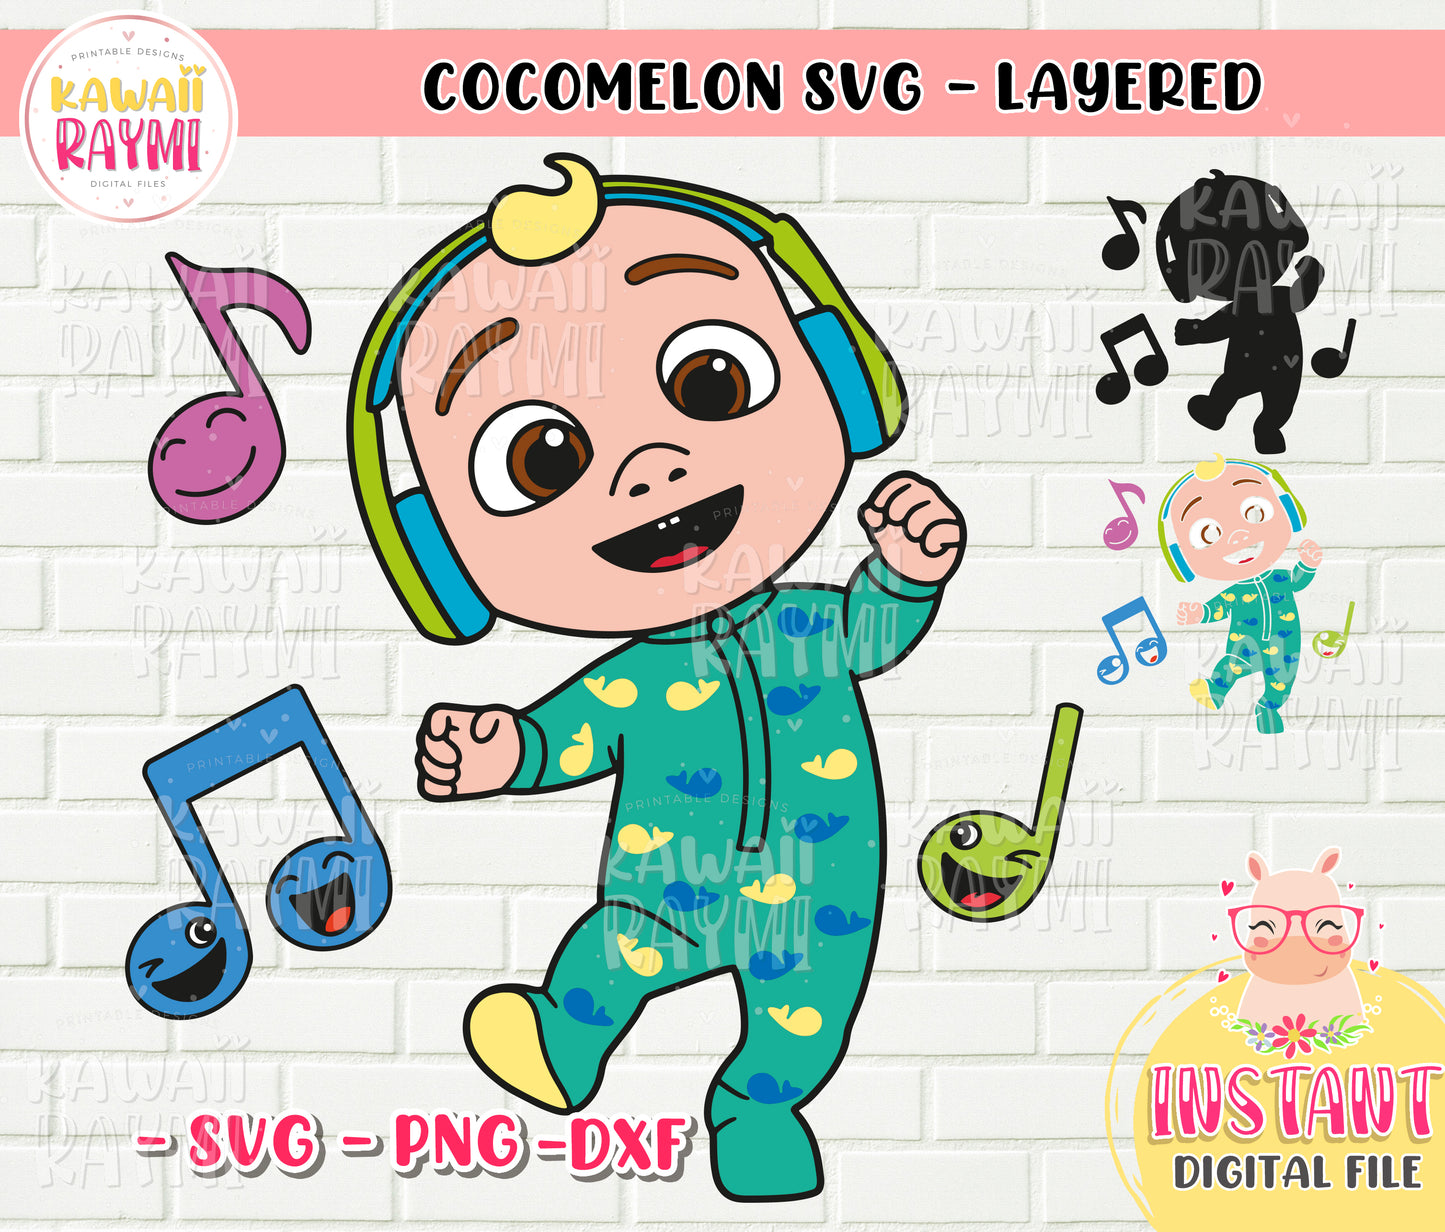 Cocomelon JJ BABY -SVG-PNG- cut file layered, cricut-Instant Download